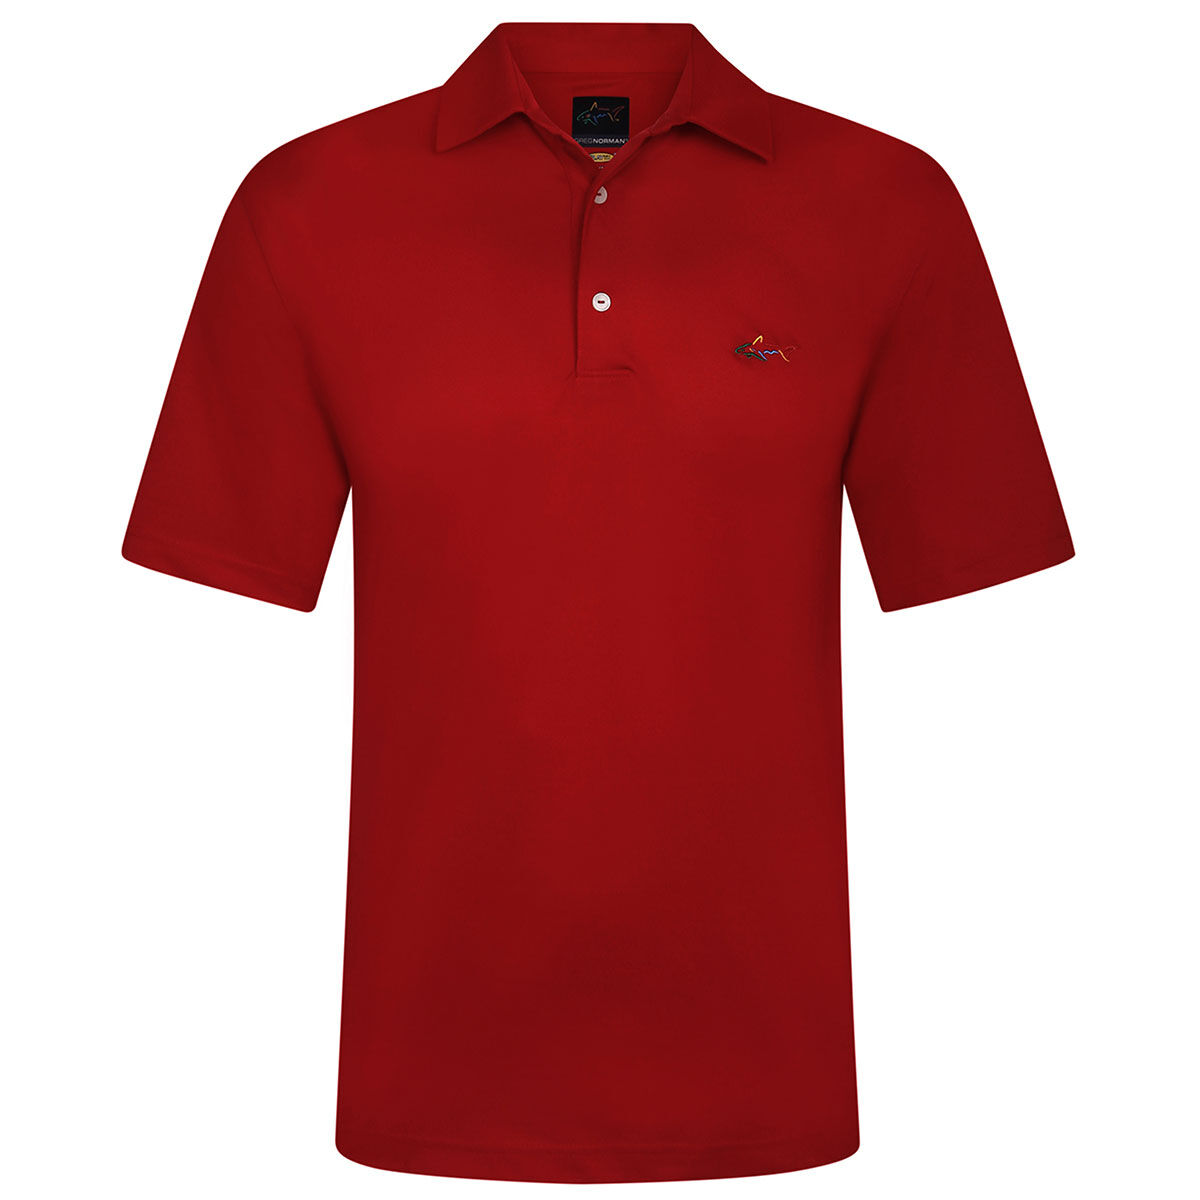 Greg Norman Red Embroidered Shark Logo Golf Polo Shirt, Mens | American Golf, Size: Small - Father's Day Gift von Greg Norman